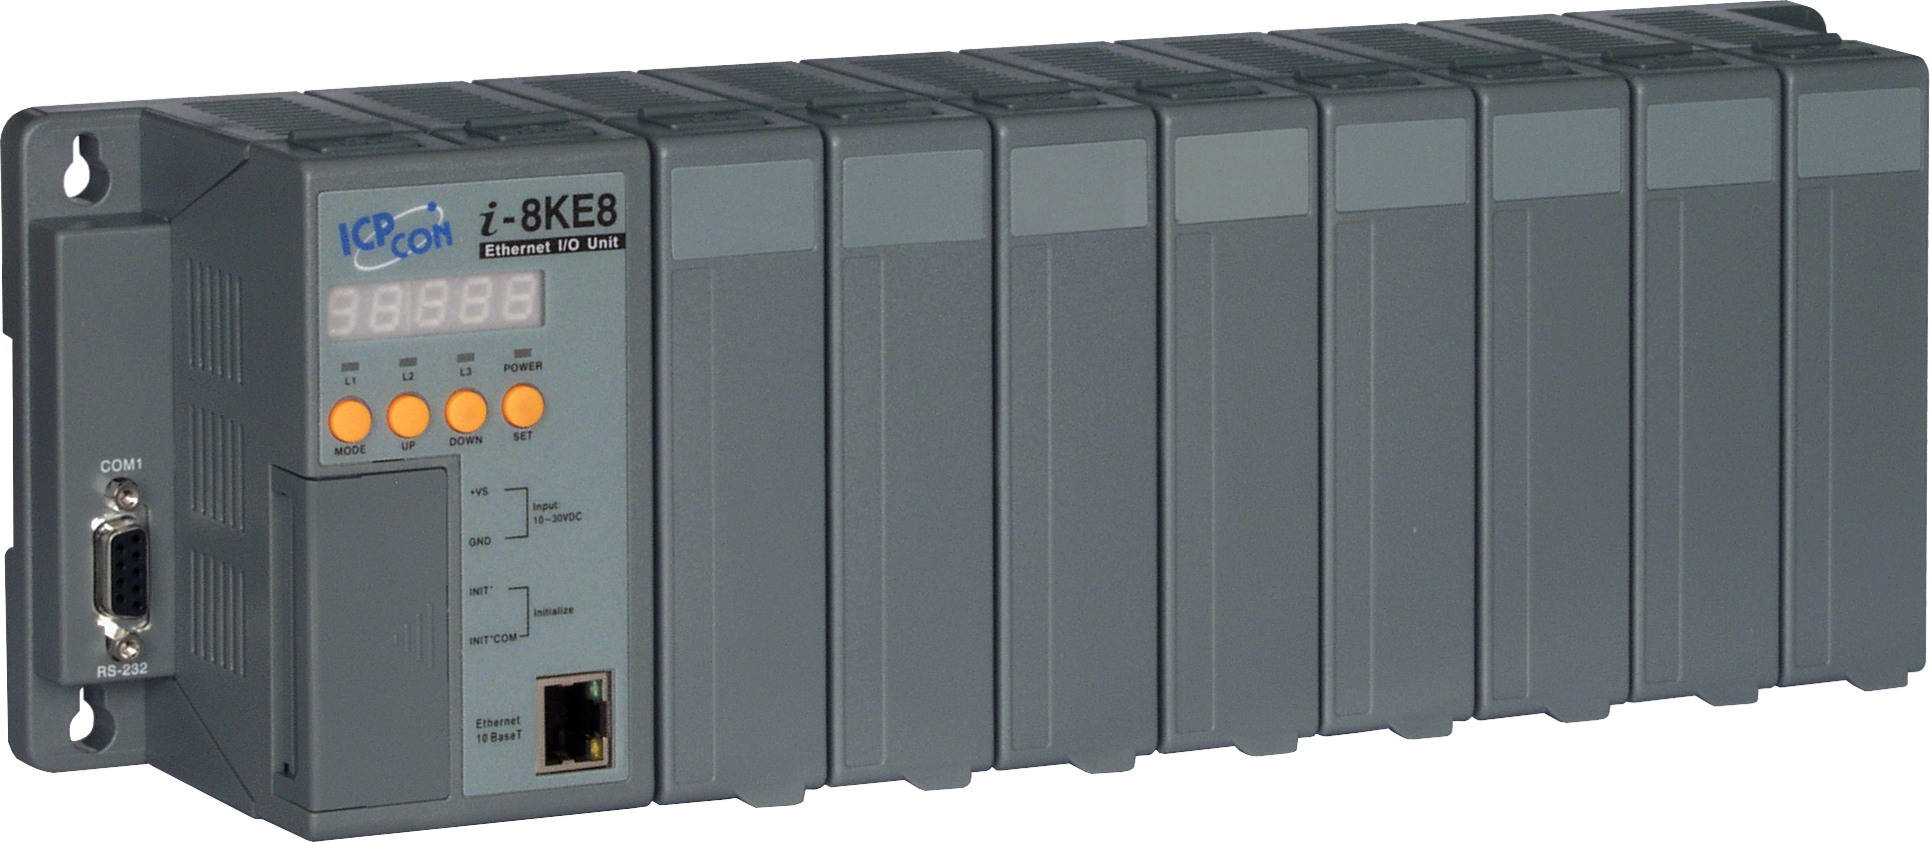 I-8KE8-G-CRCR-Automation-Controller buy online at ICPDAS-EUROPE